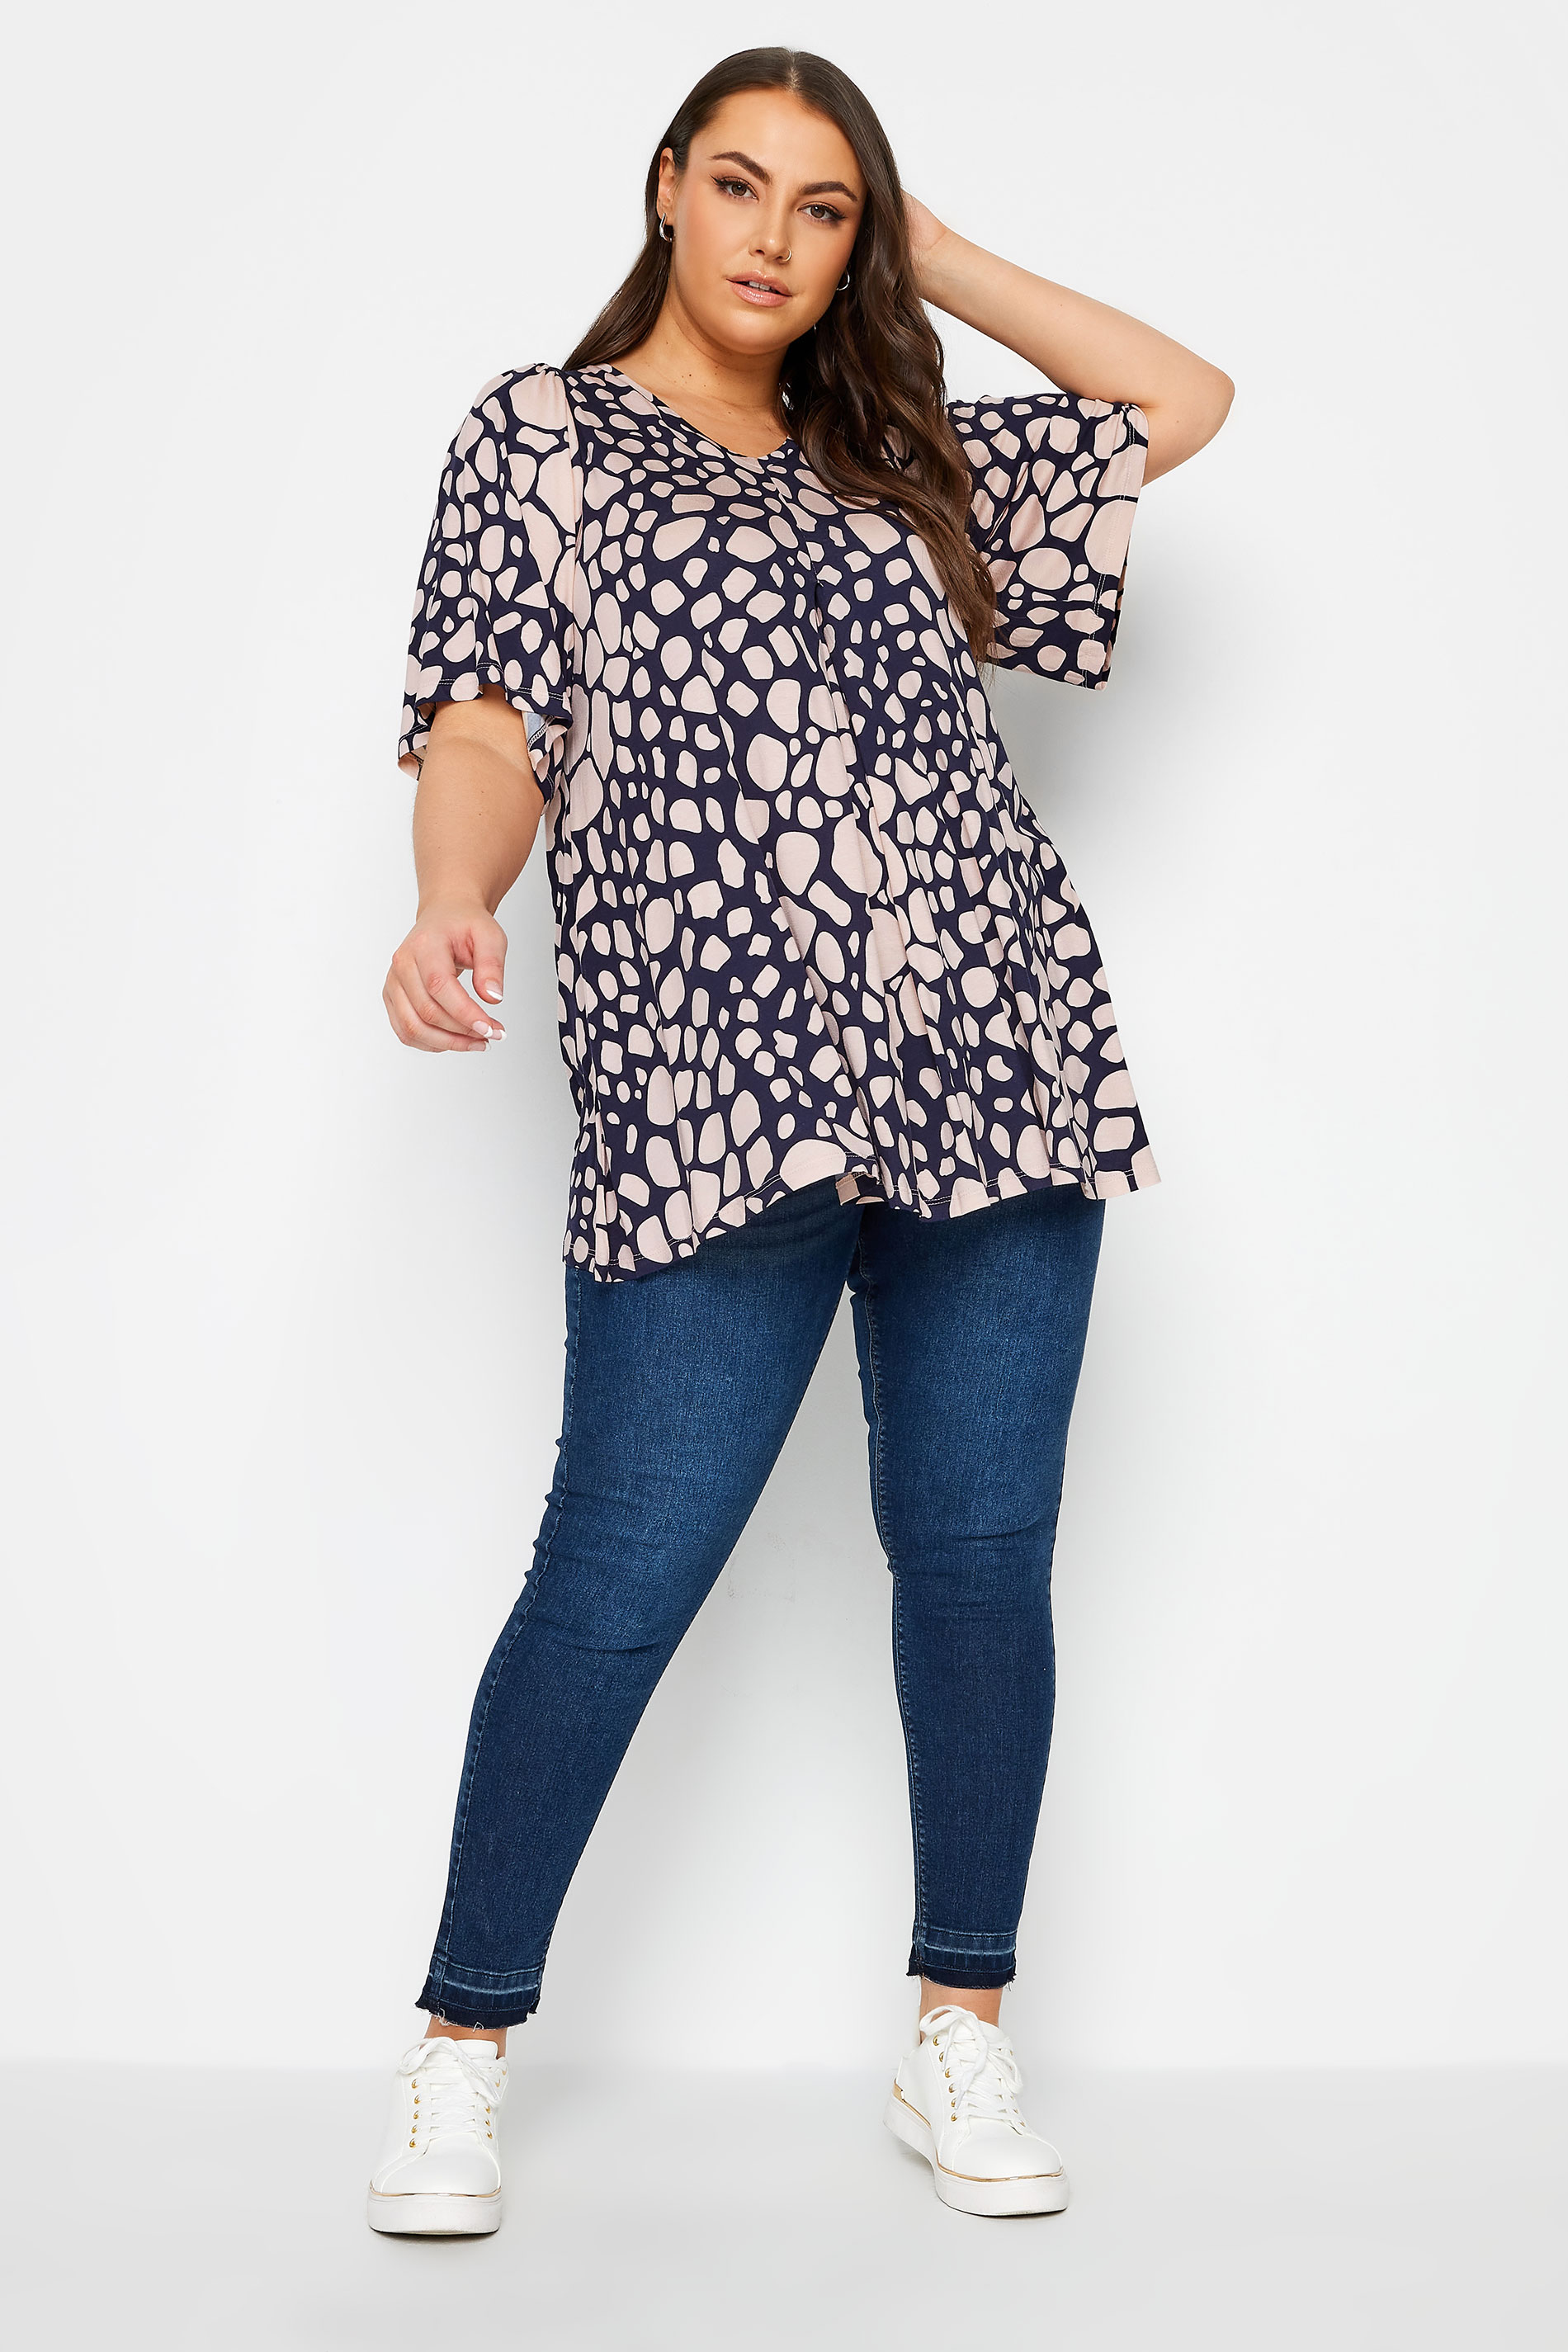 YOURS Plus Size Navy Blue & Pink Spot Print Swing Top | Yours Clothing 2